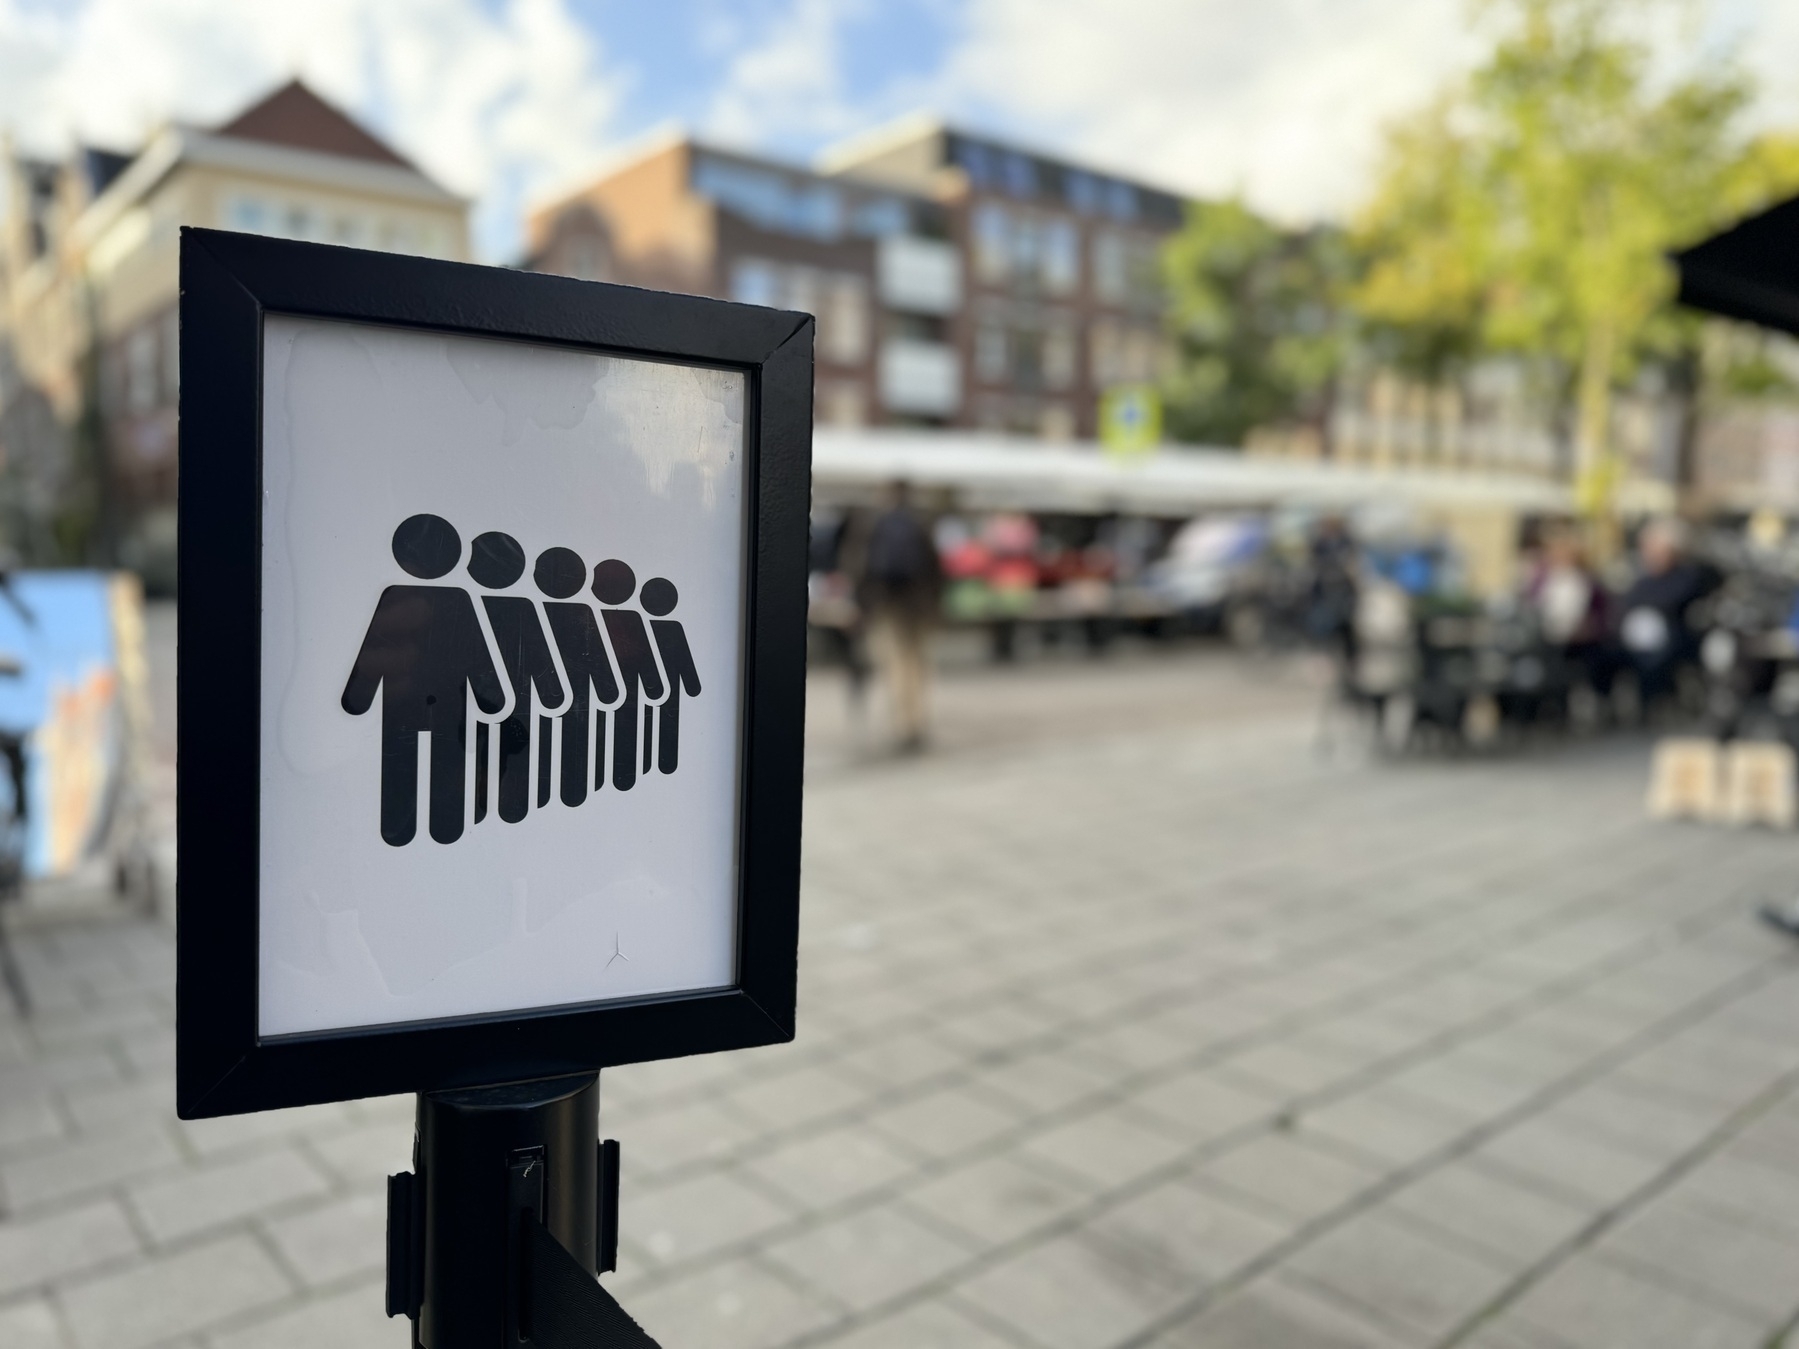 A sign showing people queueing with an out of focus background of an outdoor market.